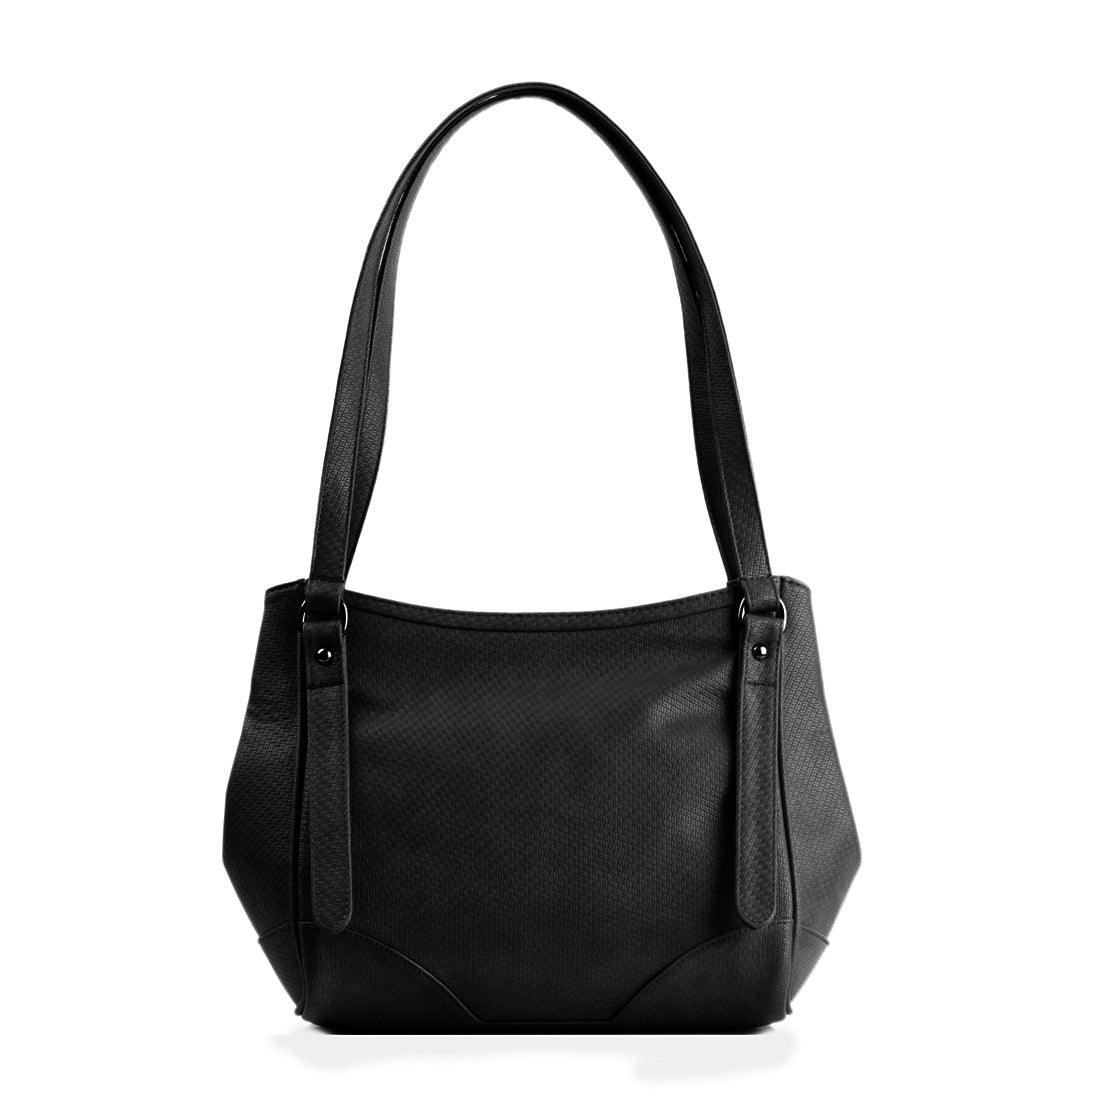 Black Leather Tote Bag Brunette Beauty - CANVAEGYPT